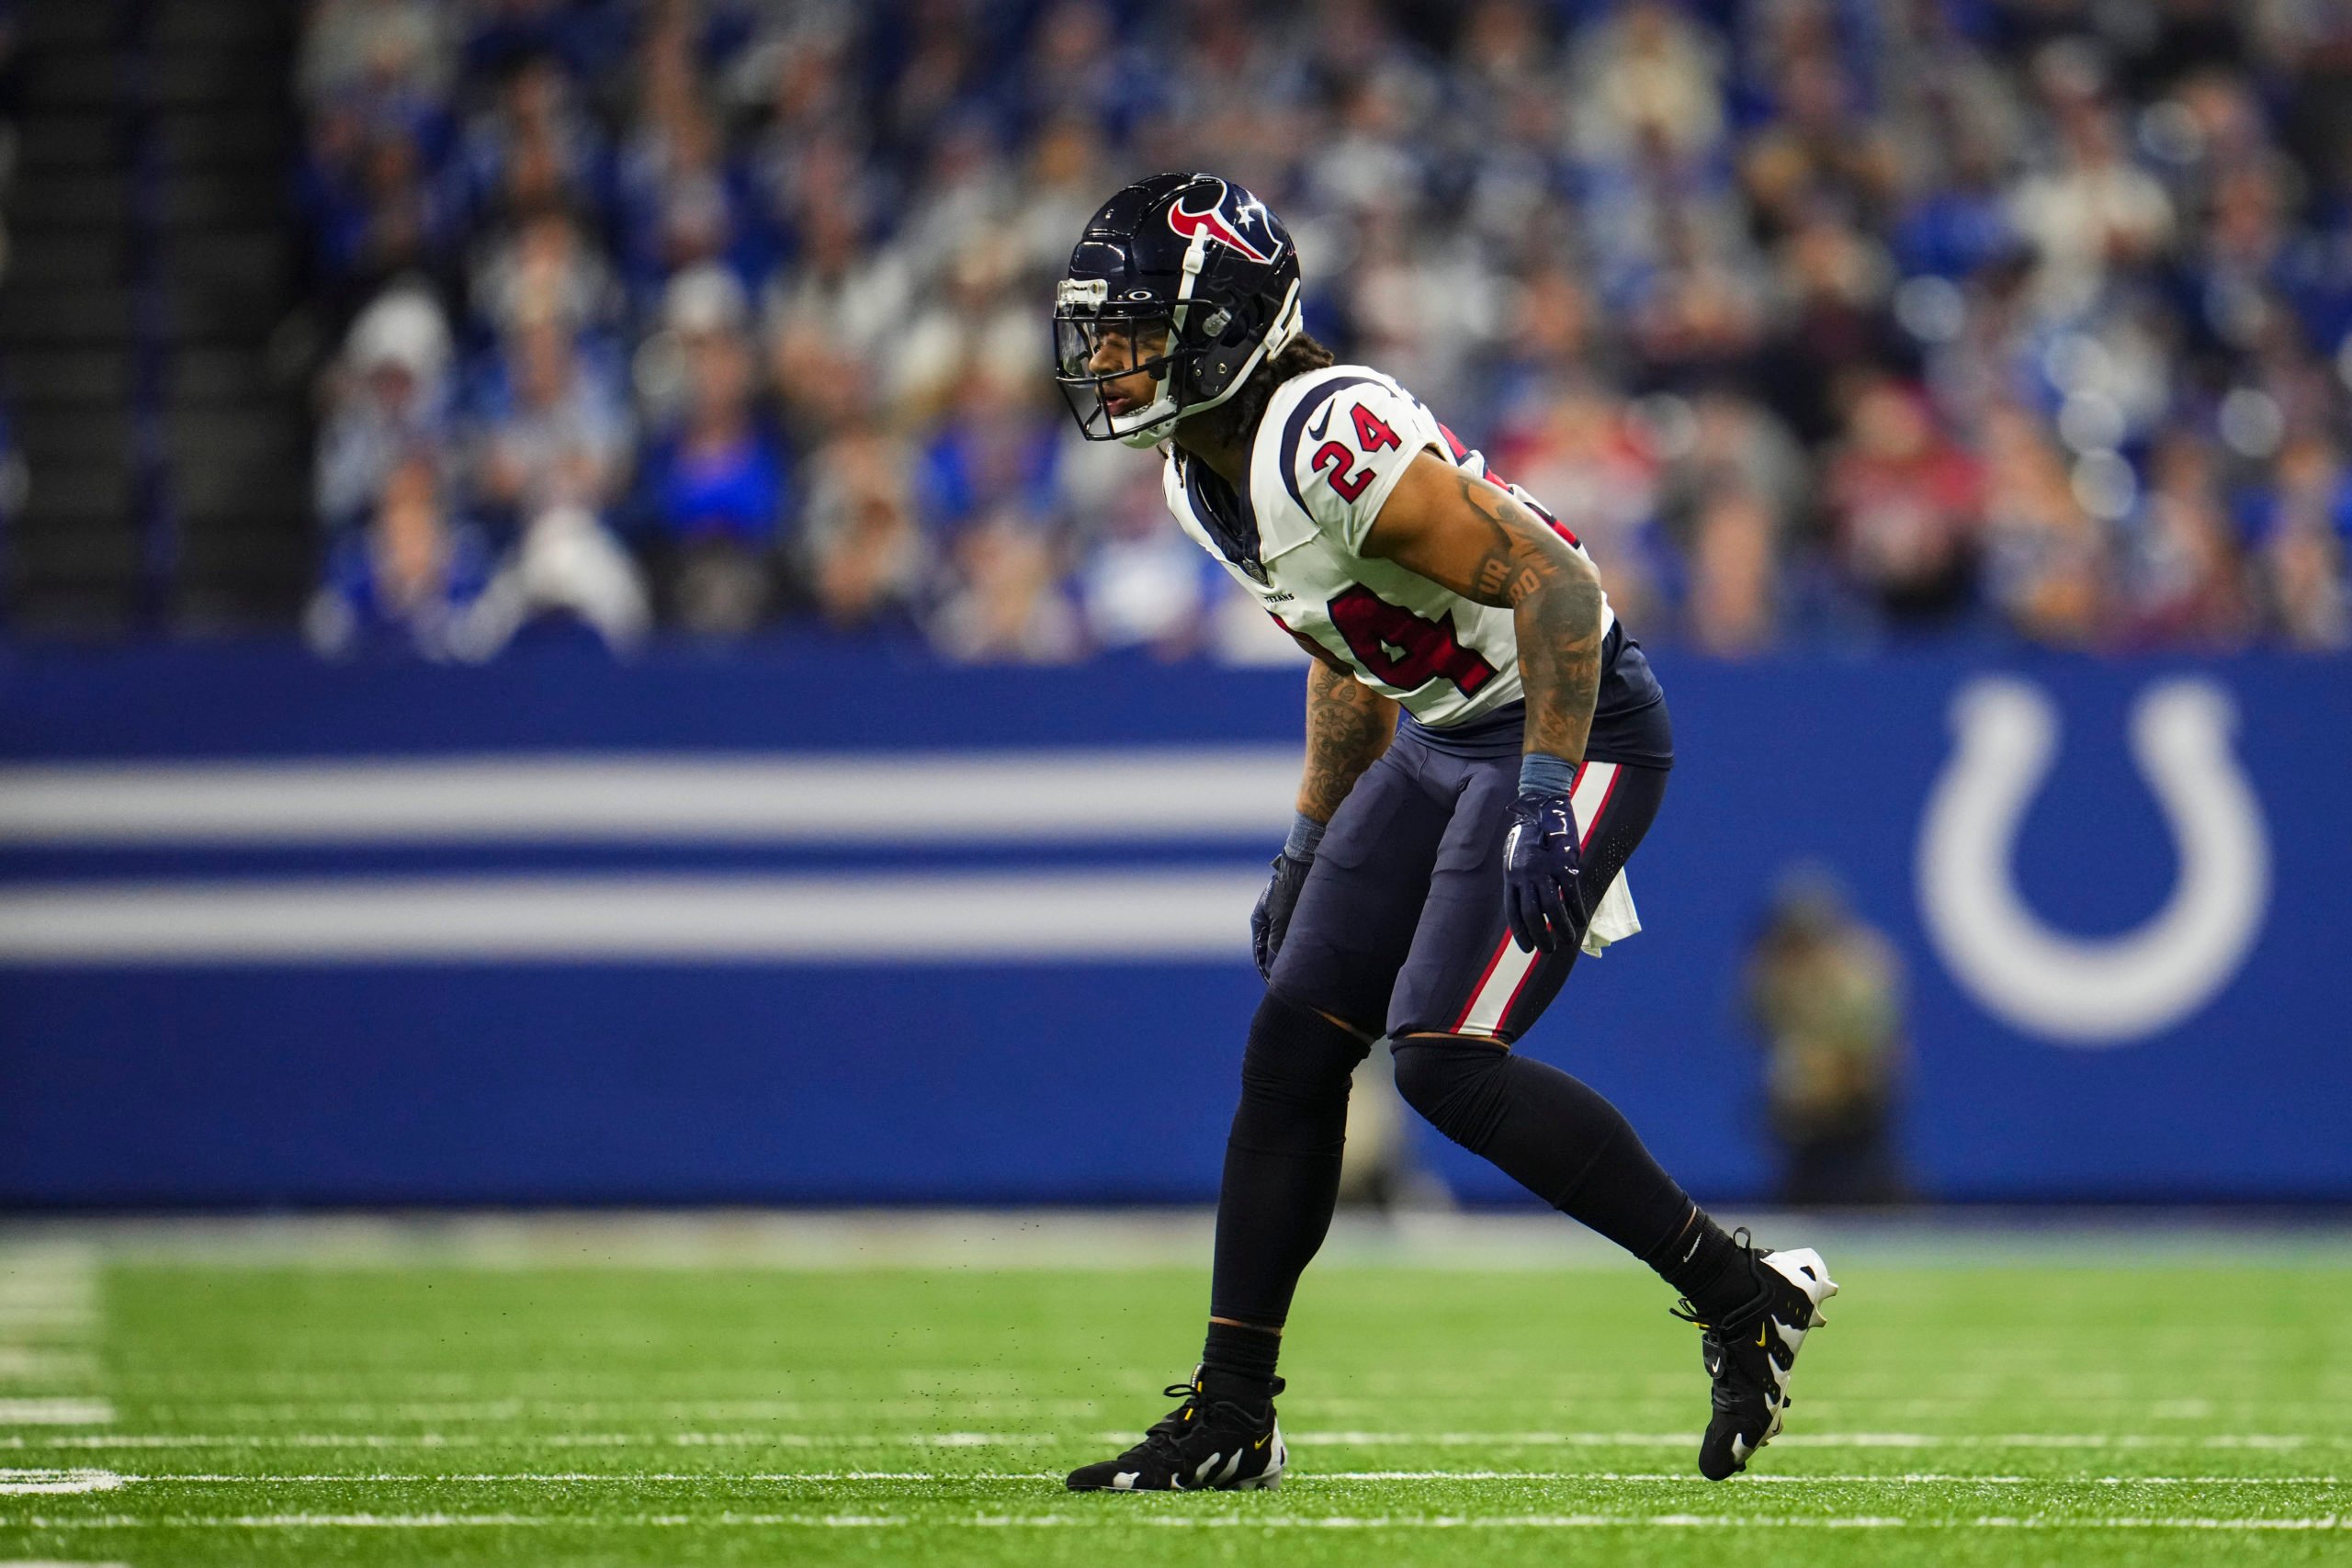 INDIANAPOLIS, IN - JANUARY 06: Derek Stingley Jr. #24 of the Houston Texans defends in coverage during an NFL football game against the Indianapolis Colts at Lucas Oil Stadium on January 6, 2024 in Indianapolis, Indiana. (Photo by Cooper Neill/Getty Images)